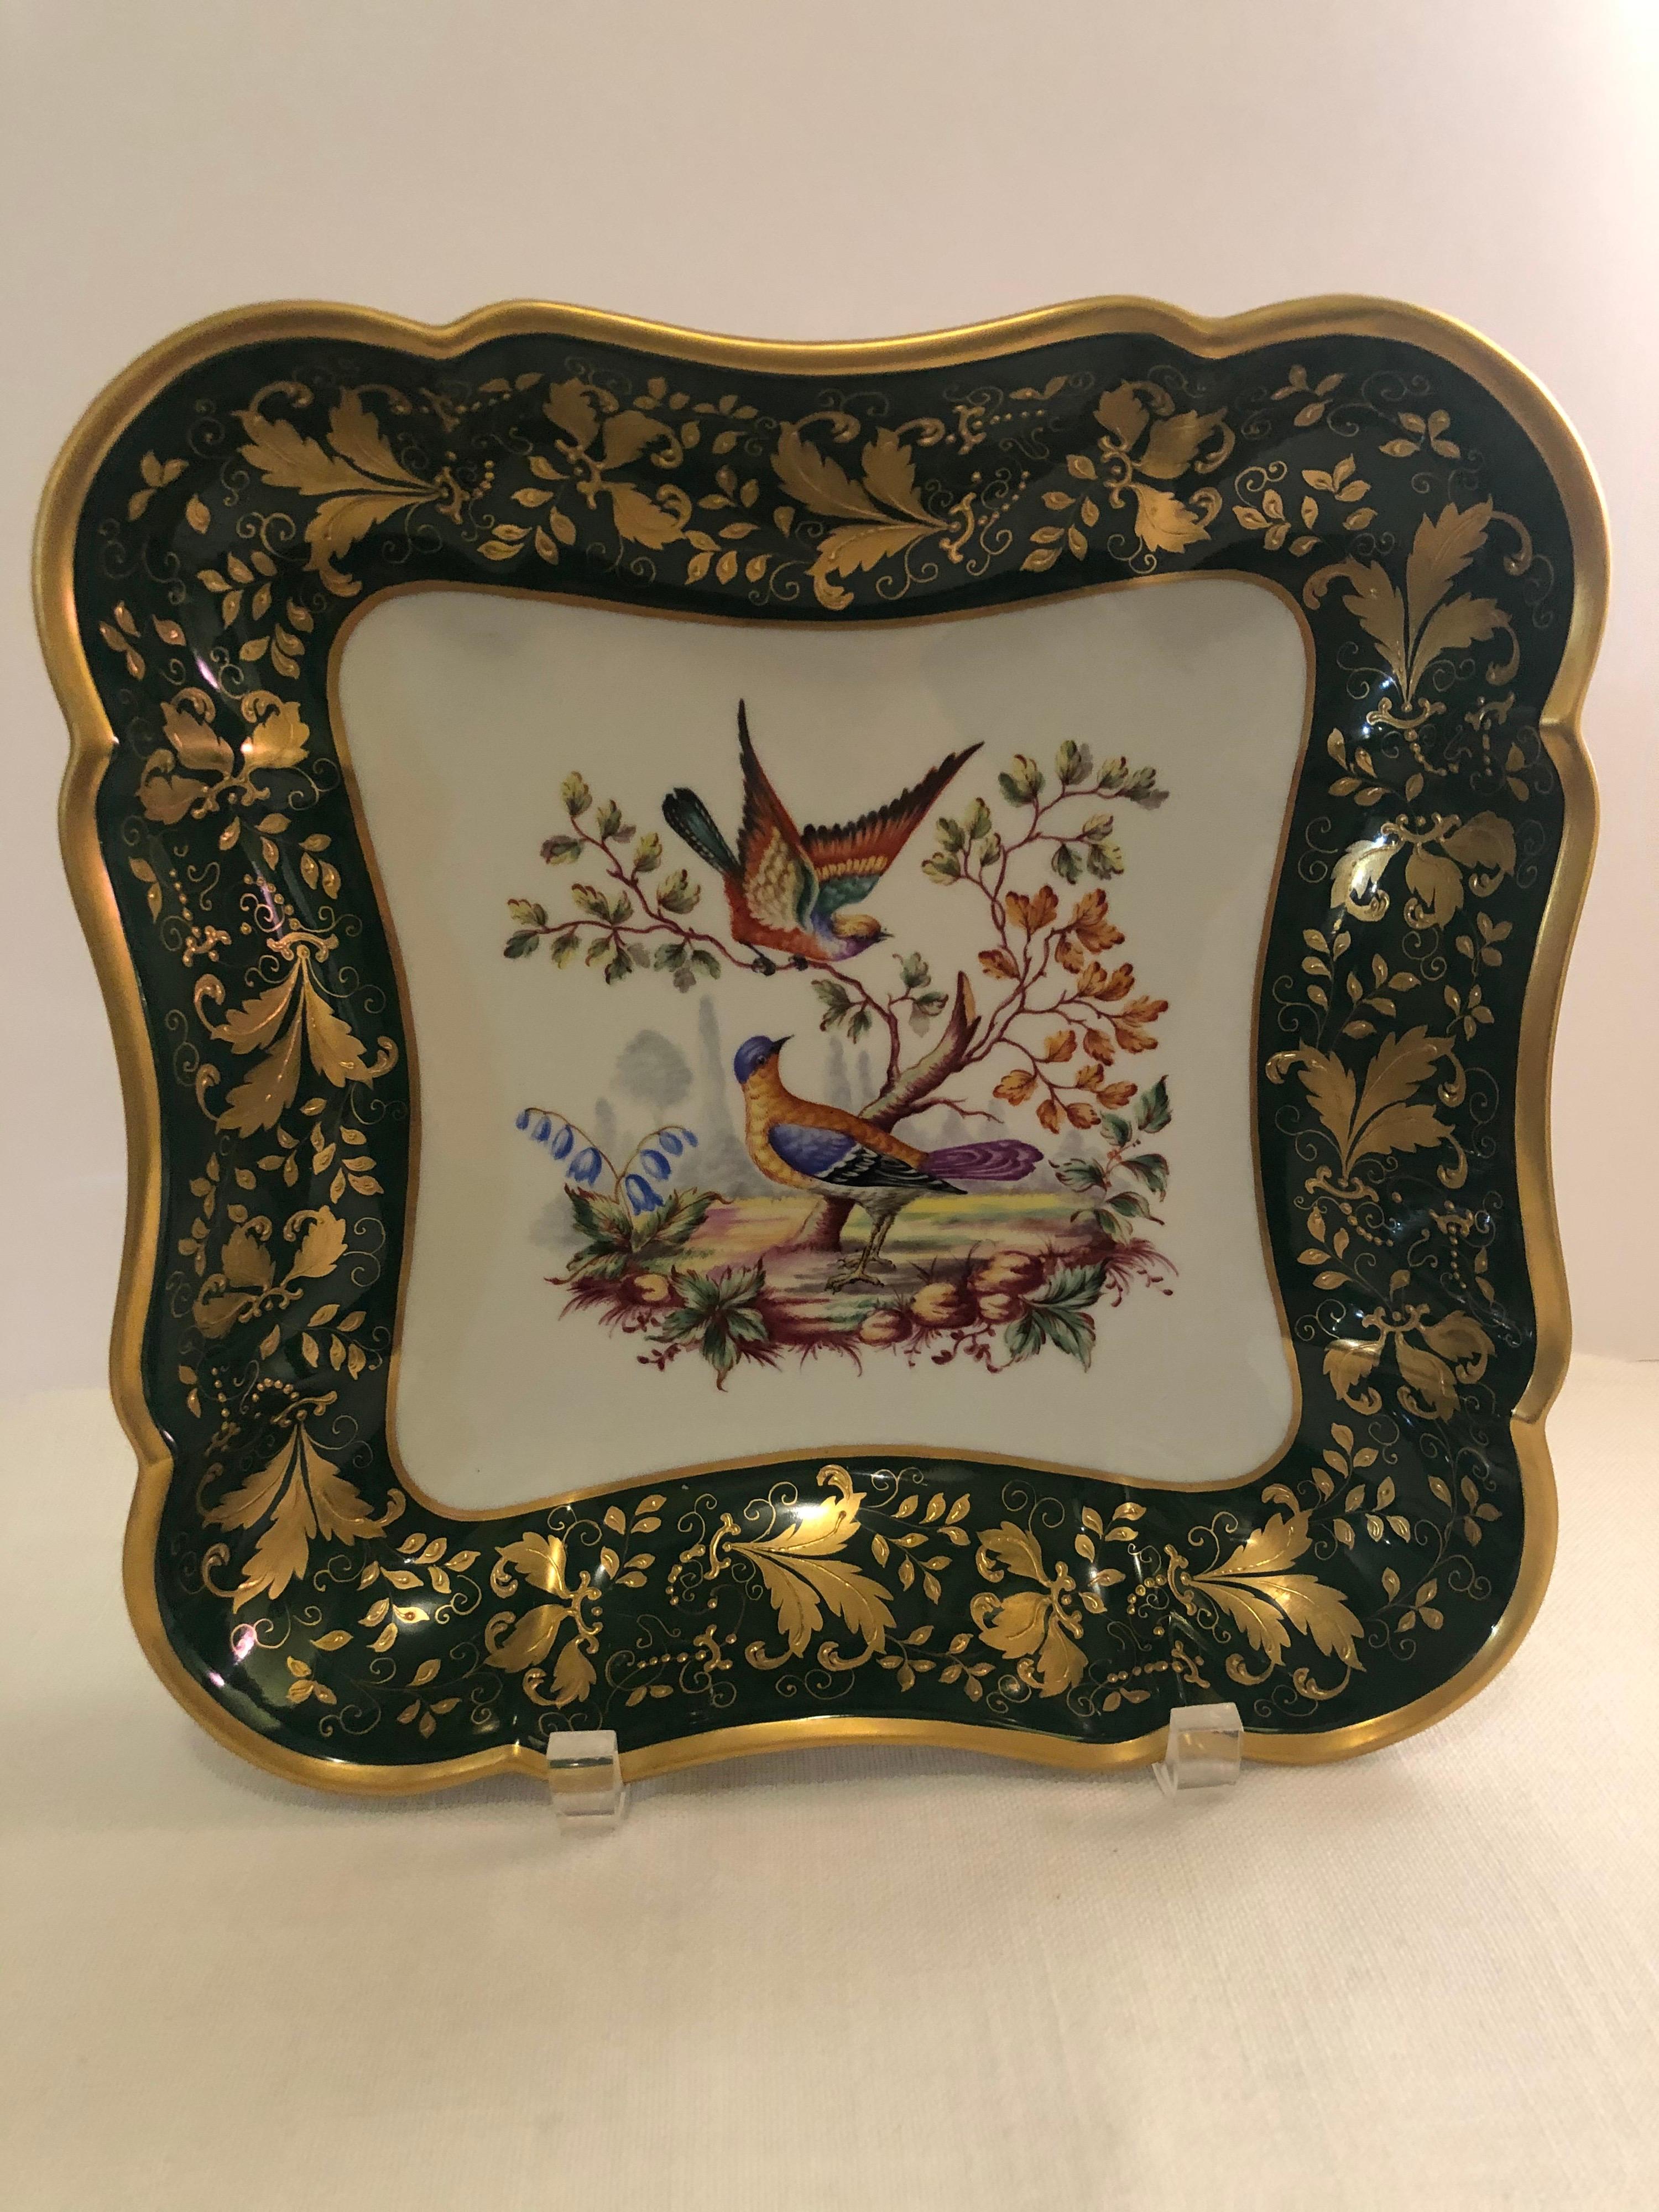 Le Tallec Green Bowl Painted with Colorful Birds with a Raised Gold Border 6